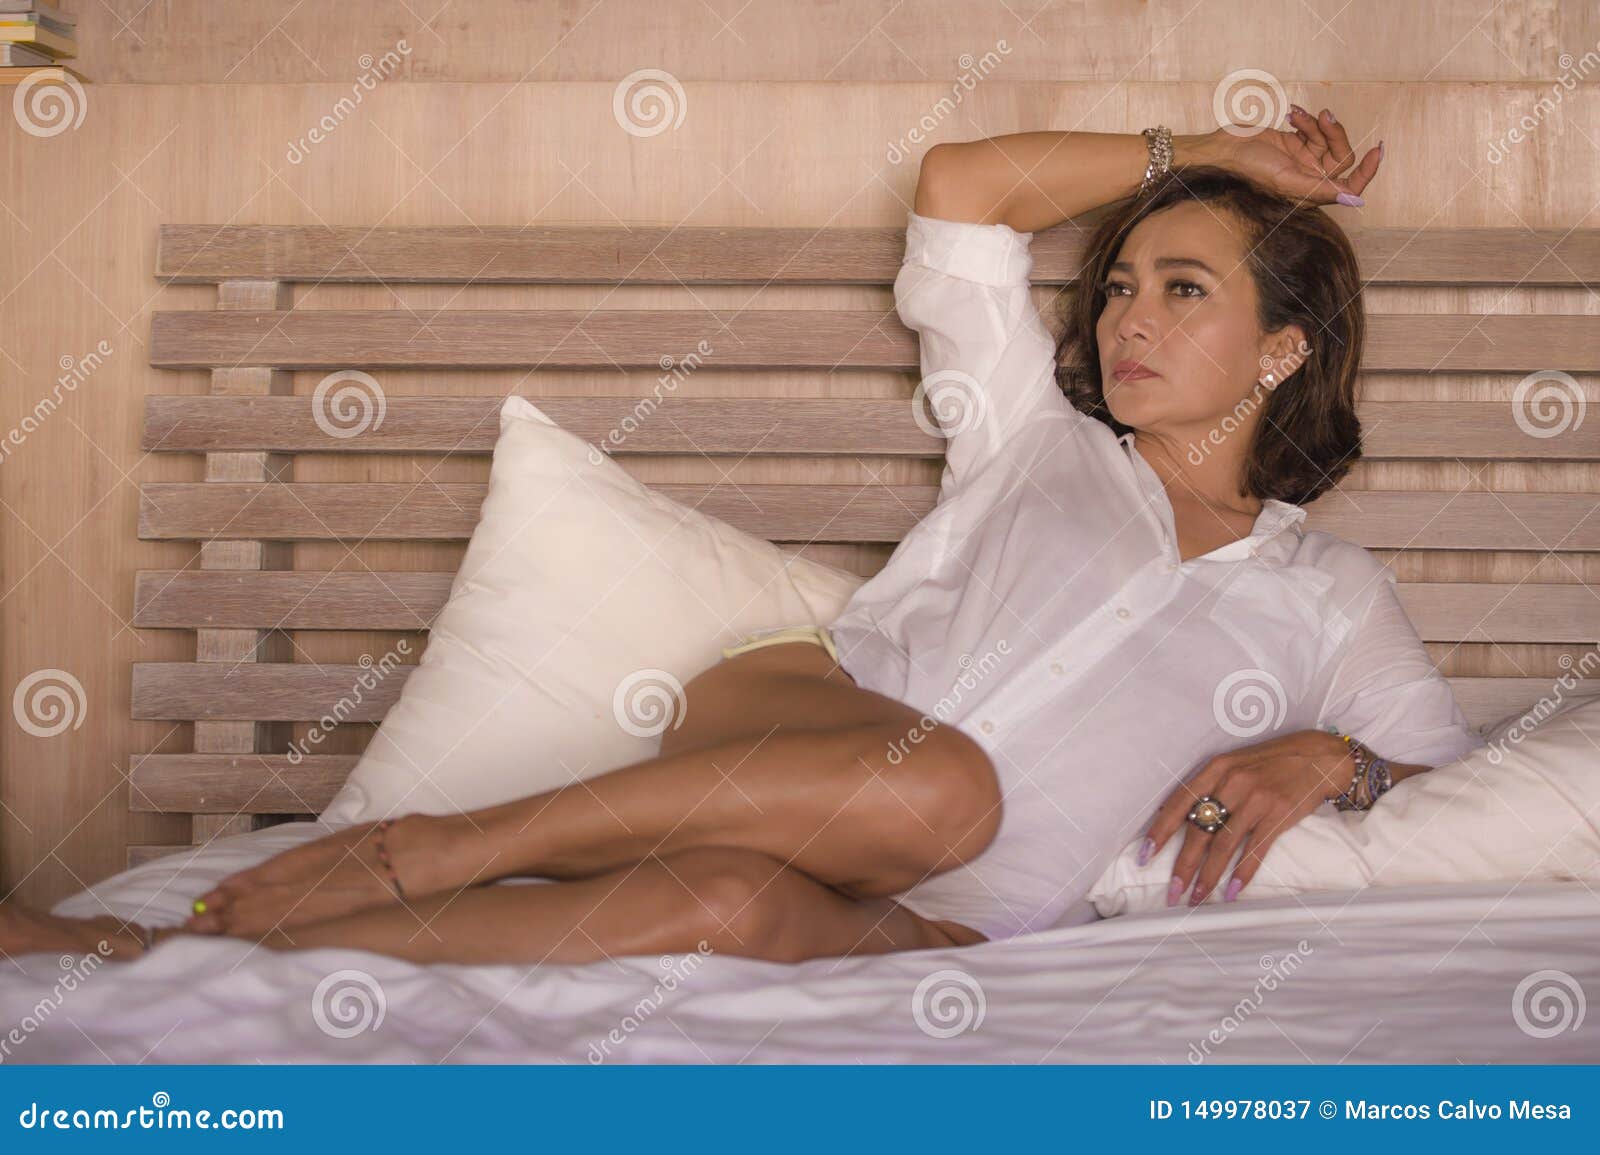 Attractive Successful and Mature Woman Aged 50s To 60s Relaxed and Confident at Home Bedroom Lying on Bed in the Morning Stock Image